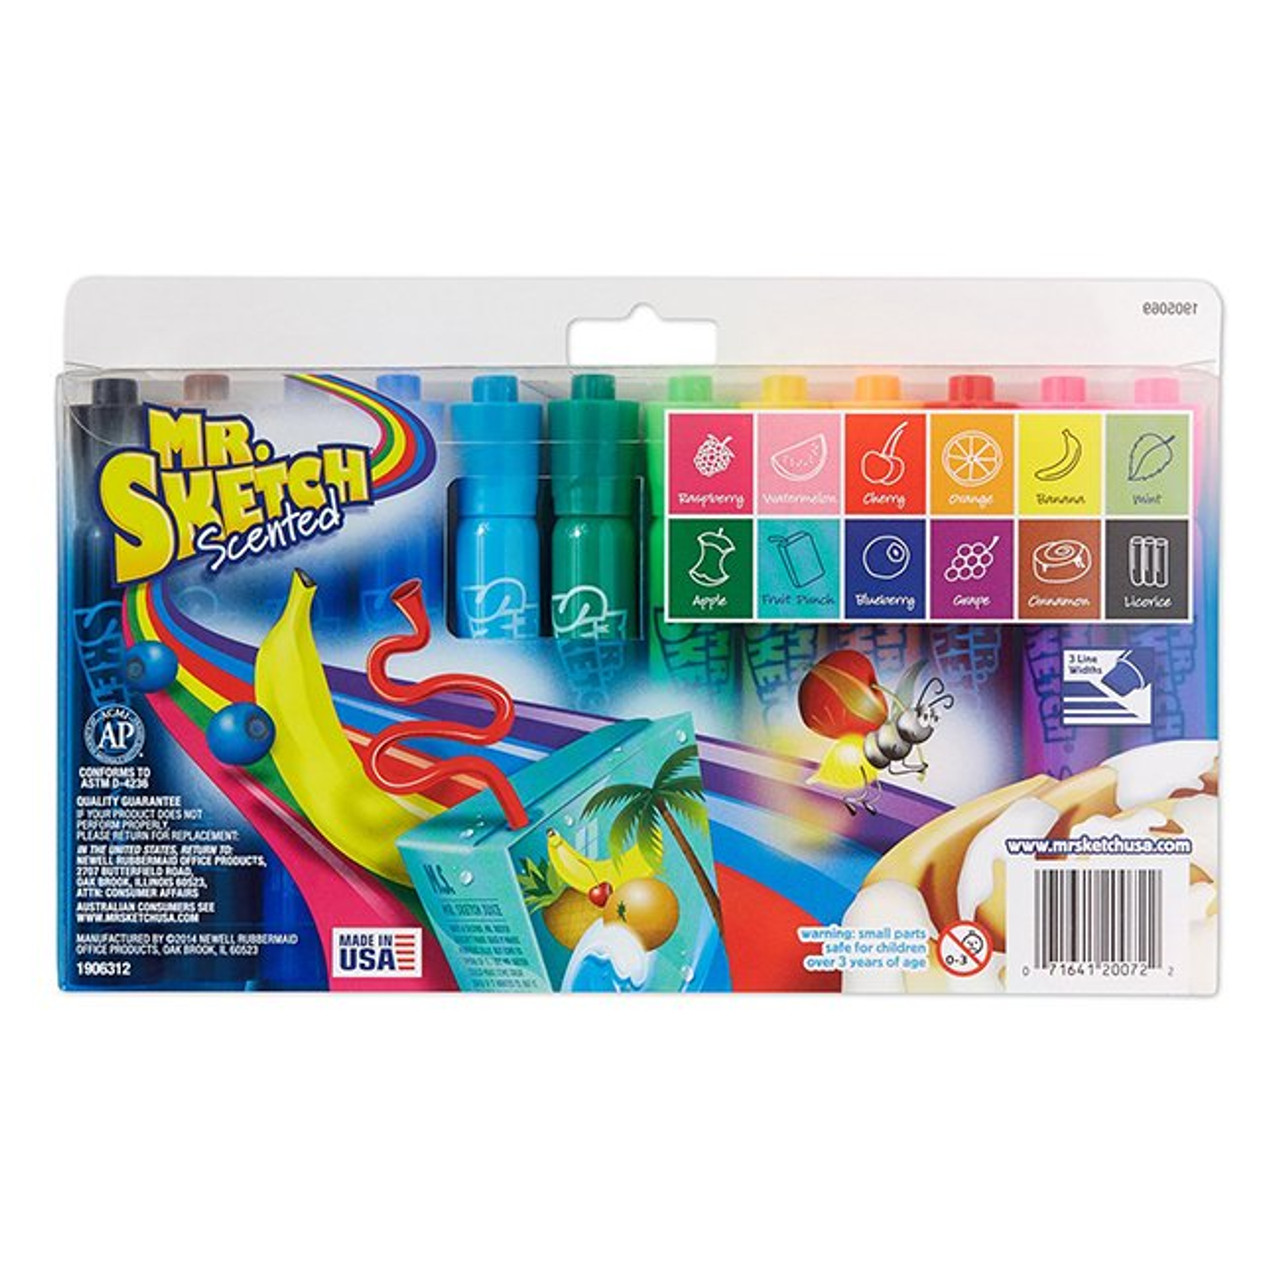 Mr. Sketch Scented watercolor markers. - Arts & Crafts